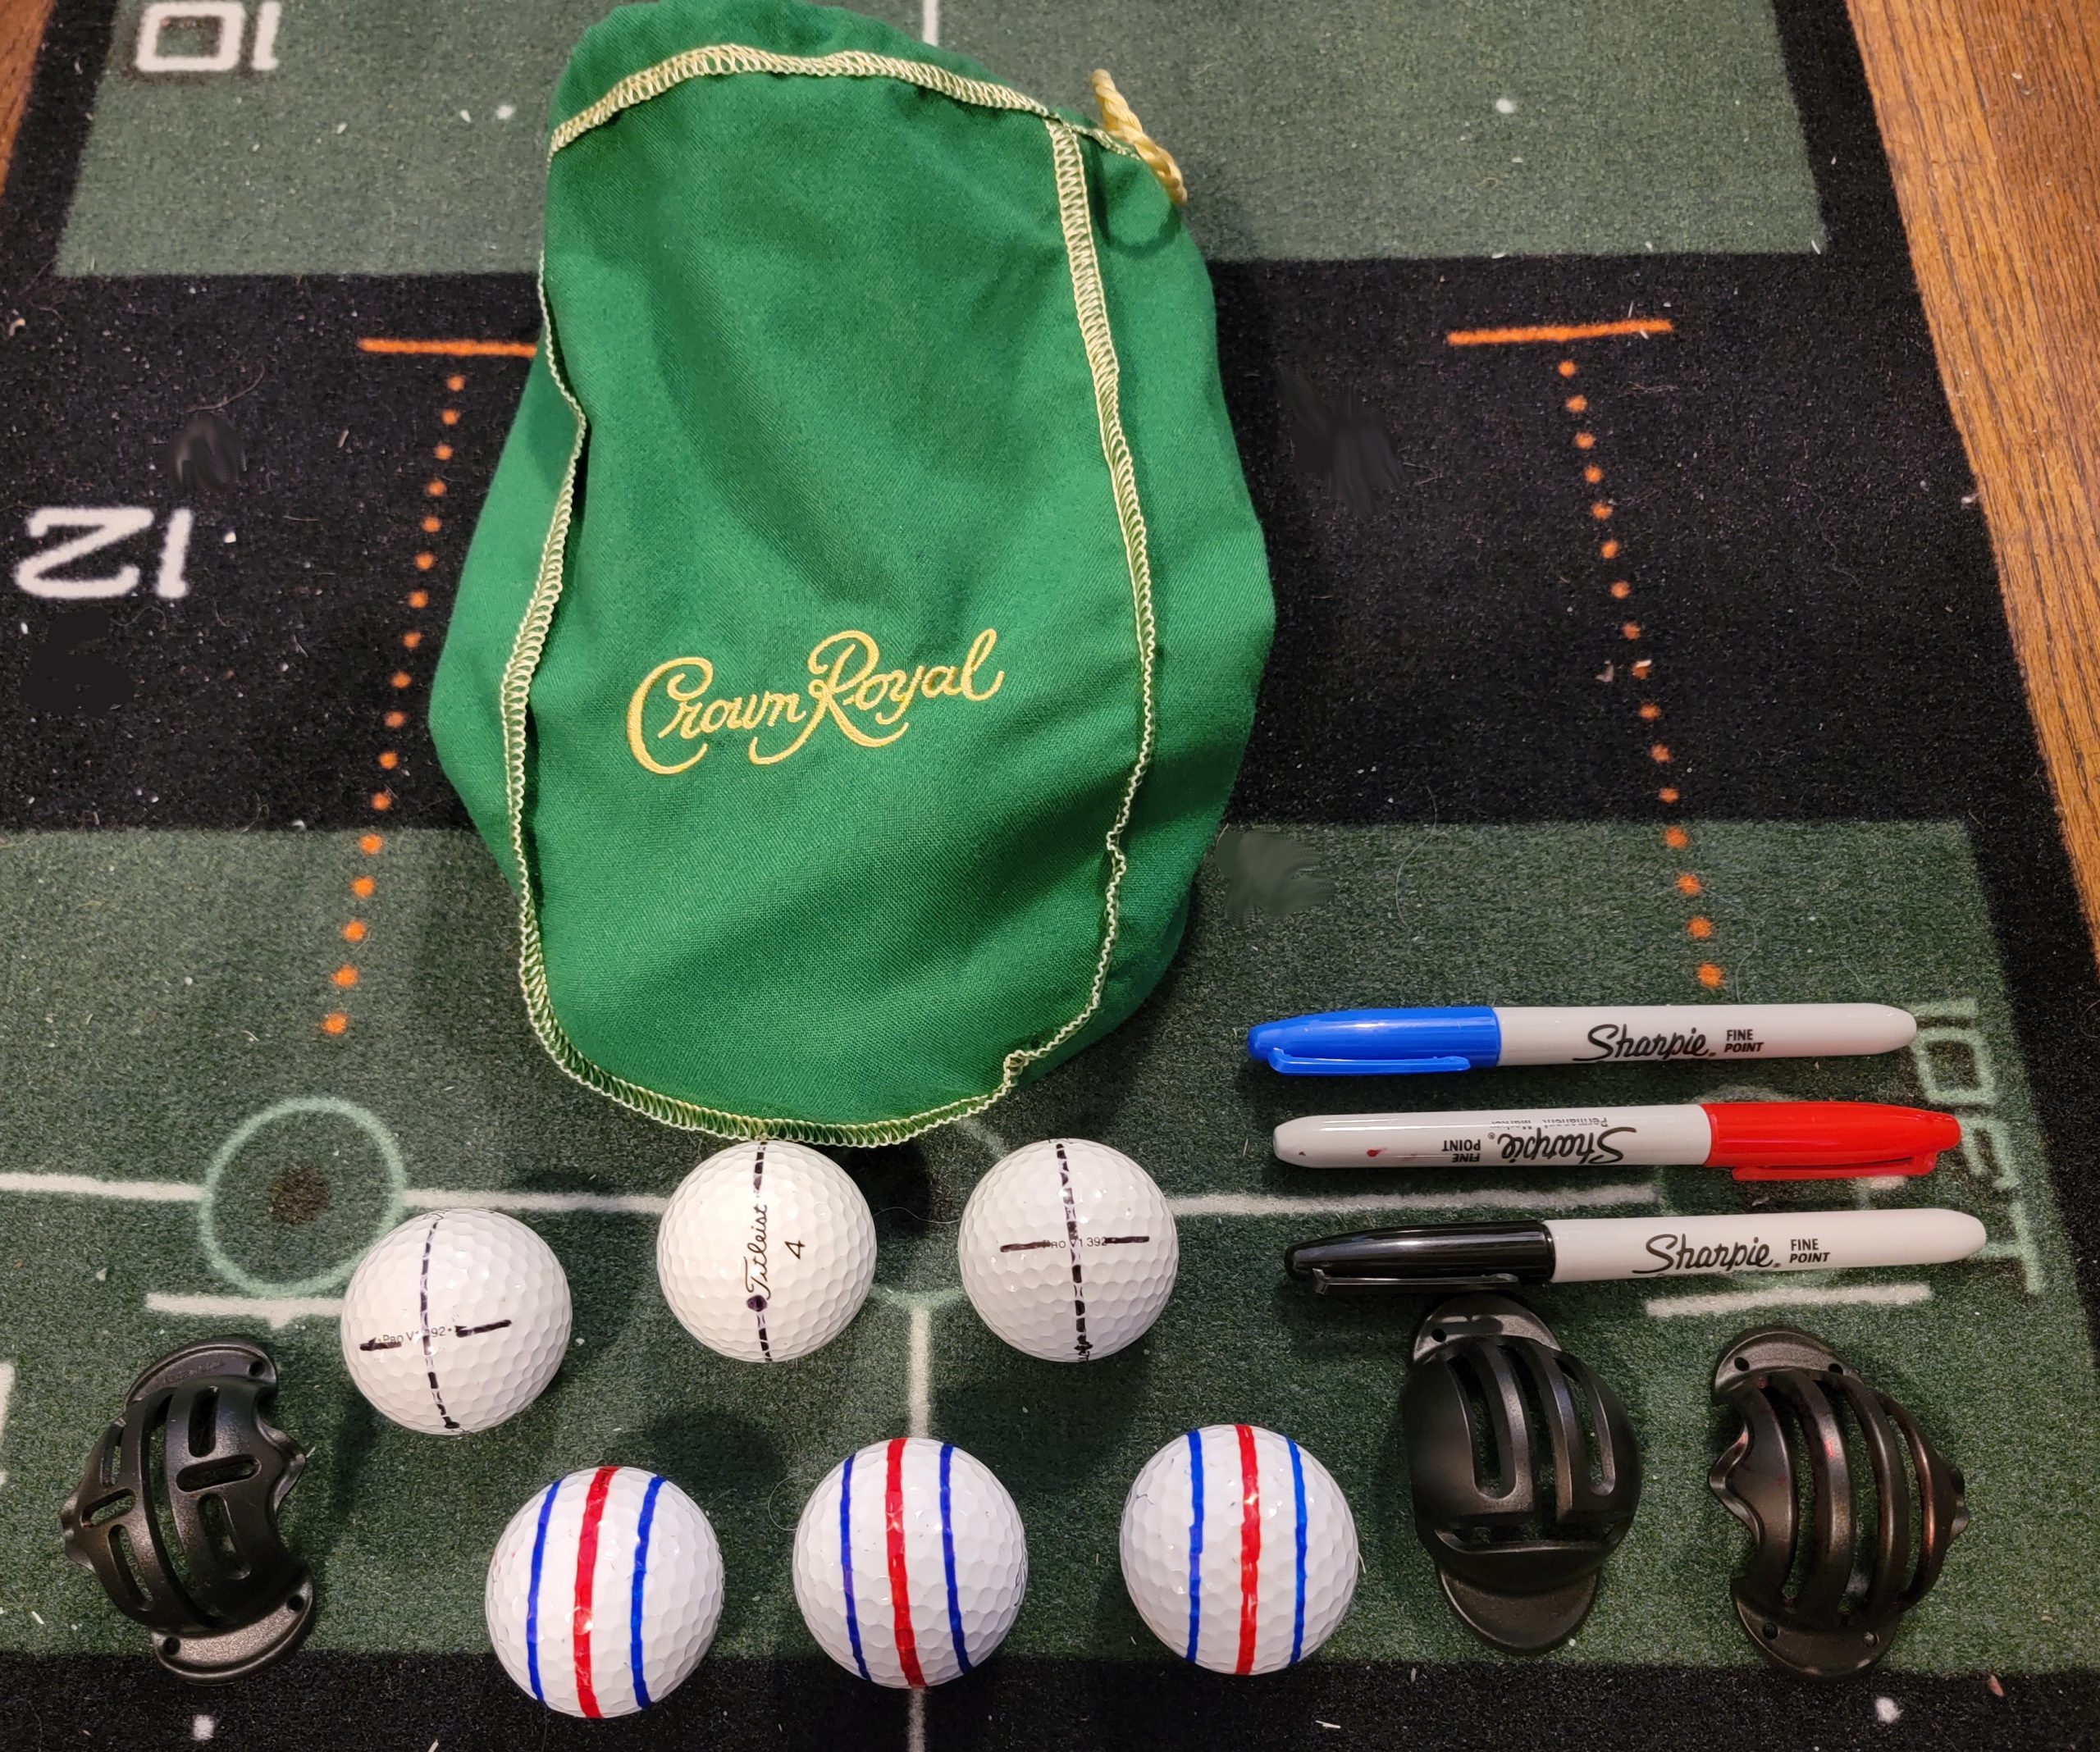 Old Duffer Golf image putting accessories lined golf balls